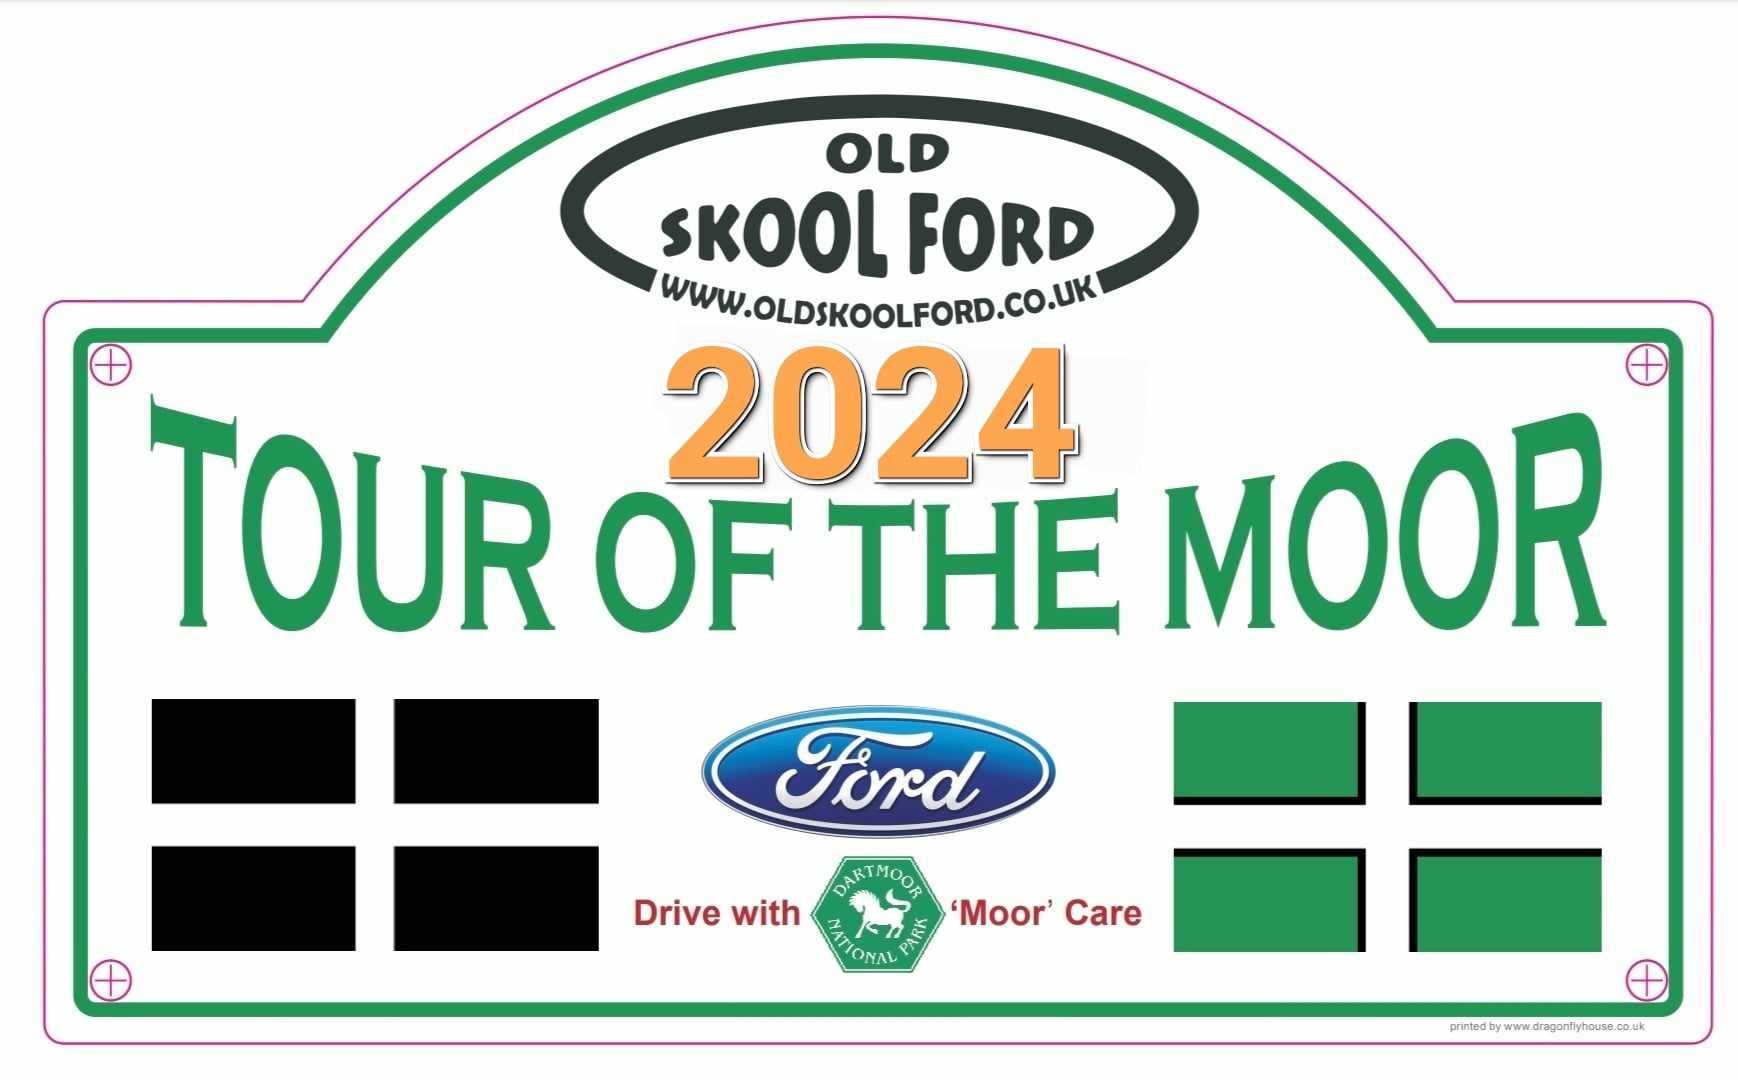 Tour Only Package - Tour of the Moor 2024